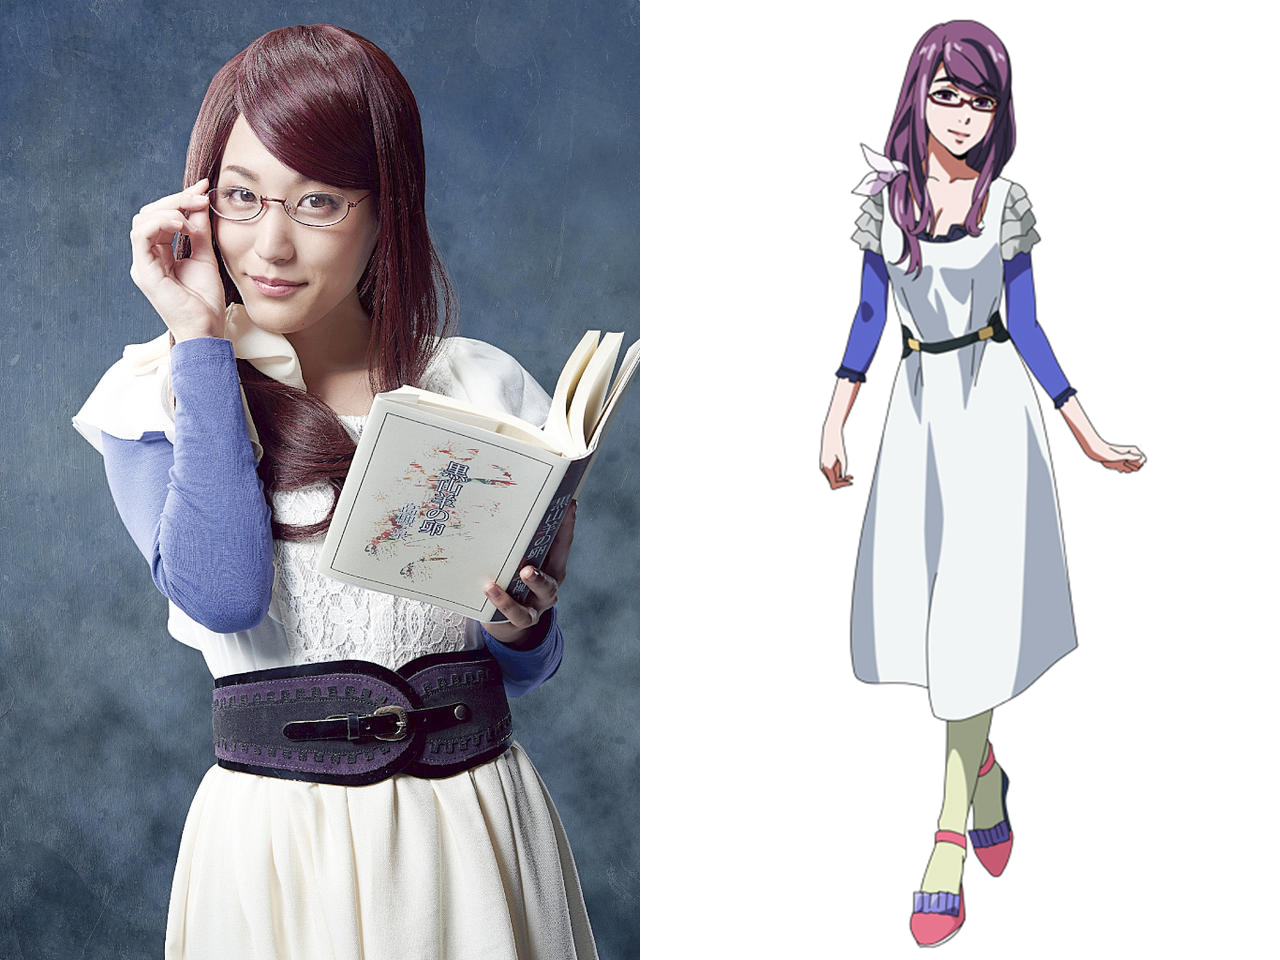 The Tokyo Ghoul Stage Play Cast All Dressed Up